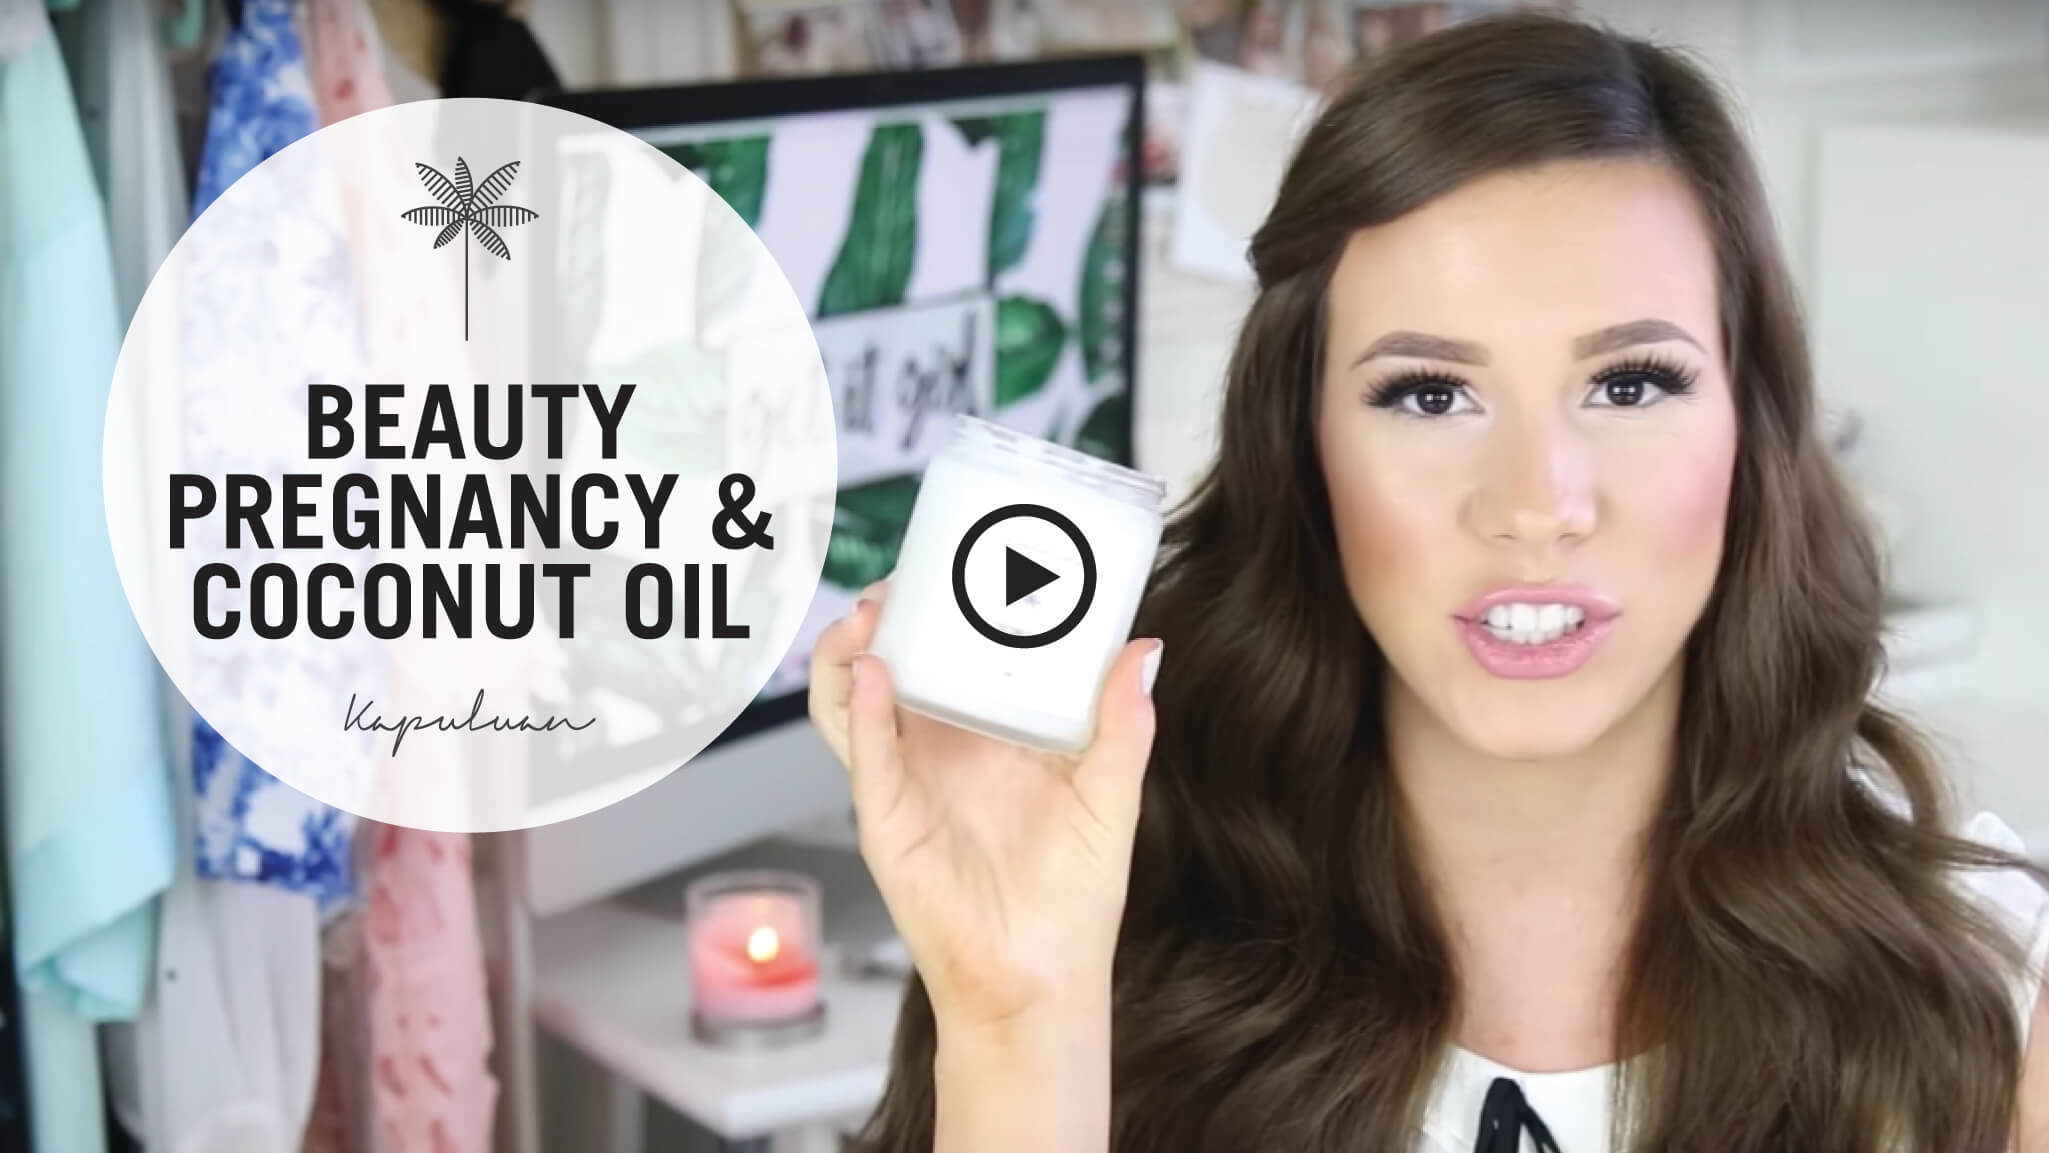 A woman presenting a coconut product in a beauty and wellness video, discussing the topic of "beauty, pregnancy & coconut oil.